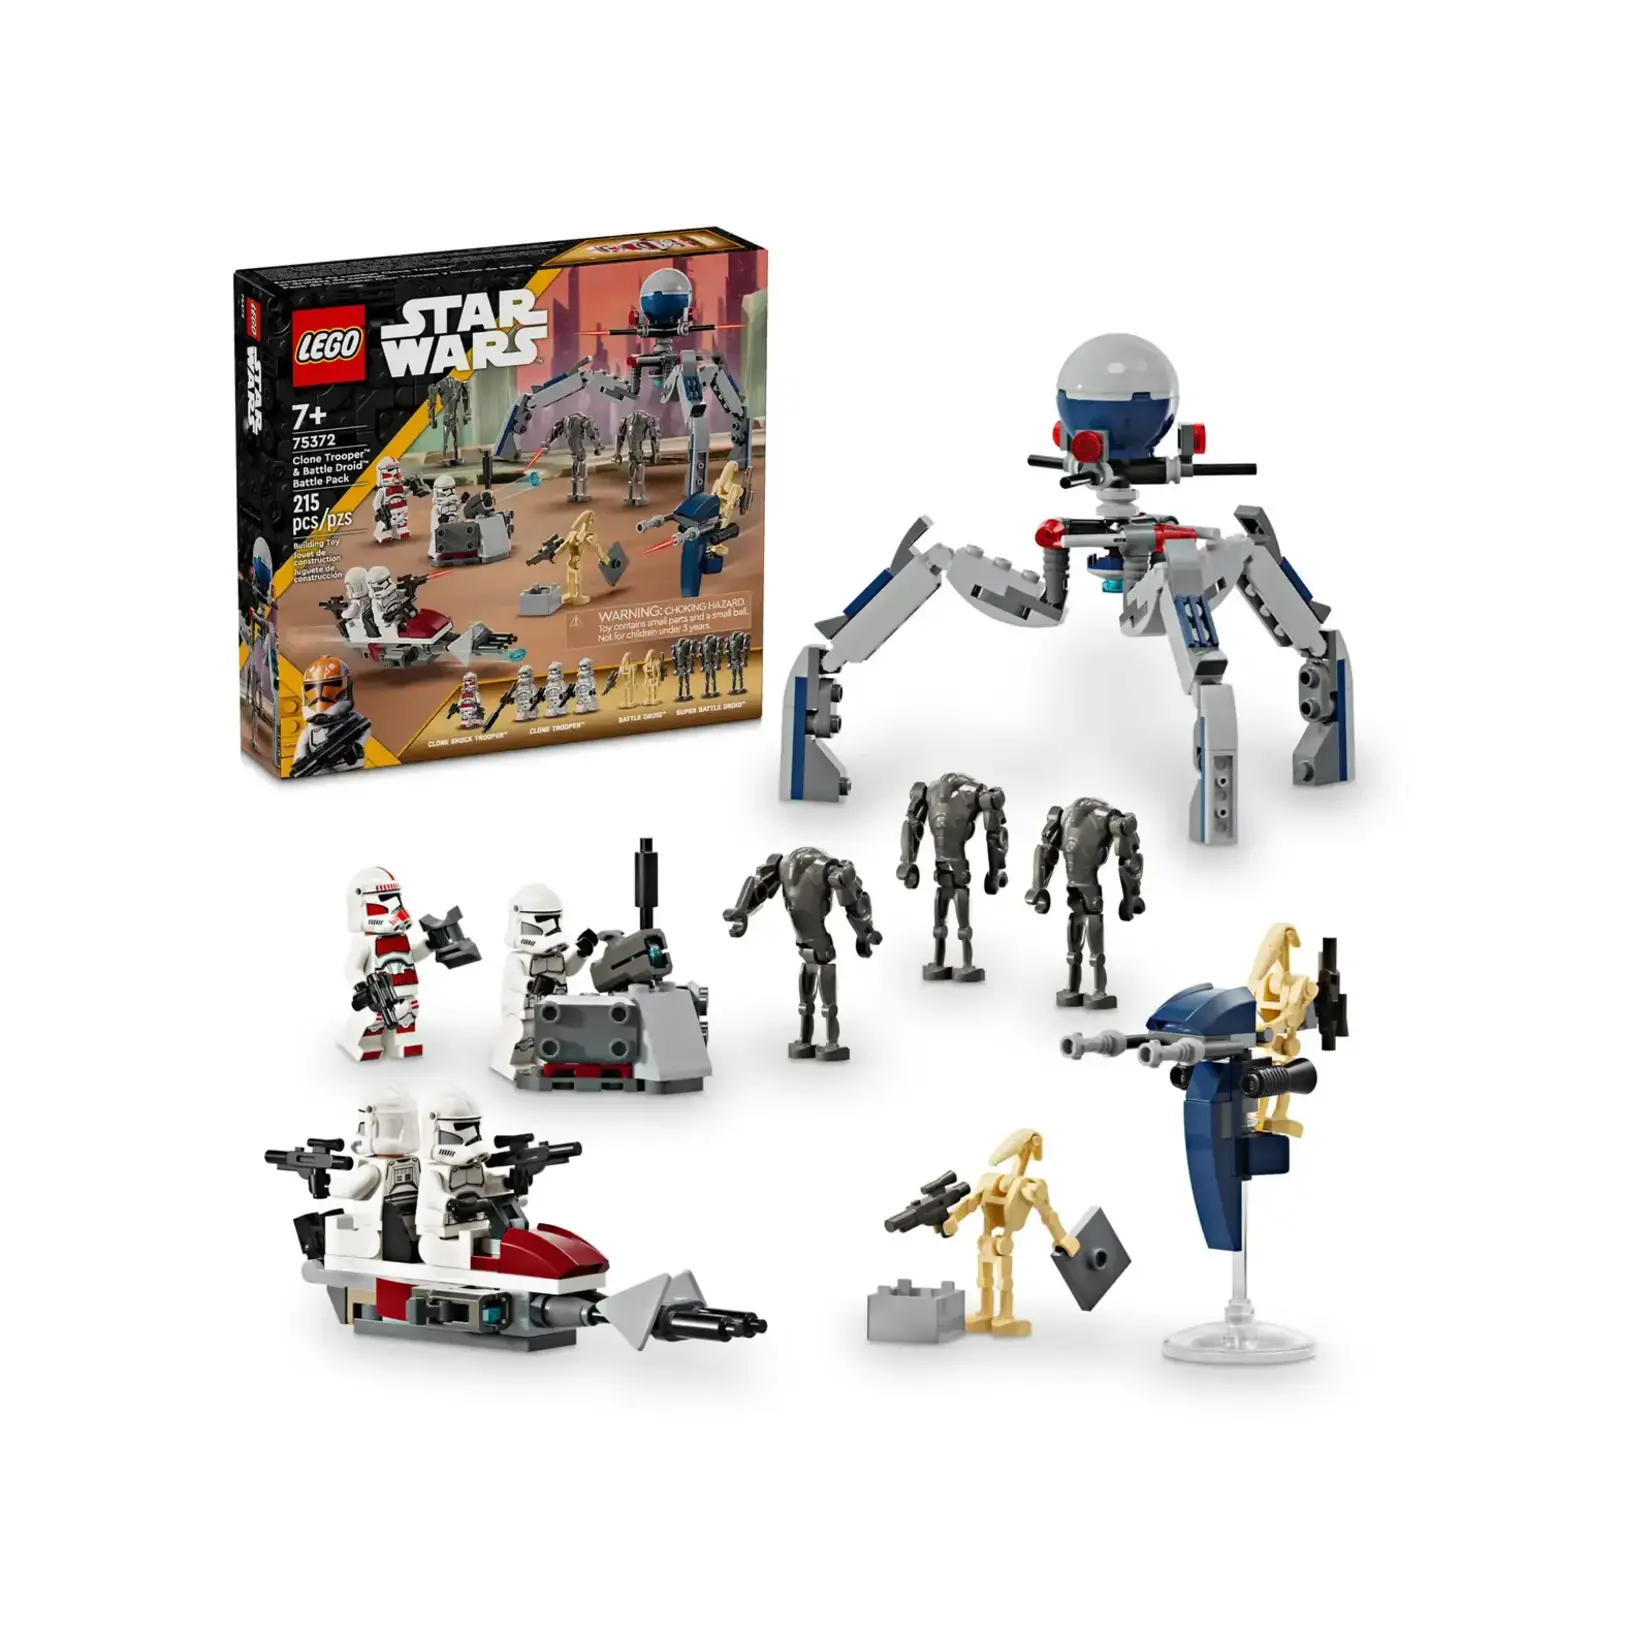 LEGO SW: Clone Trooper and Battle Droid Battle Pack 75372